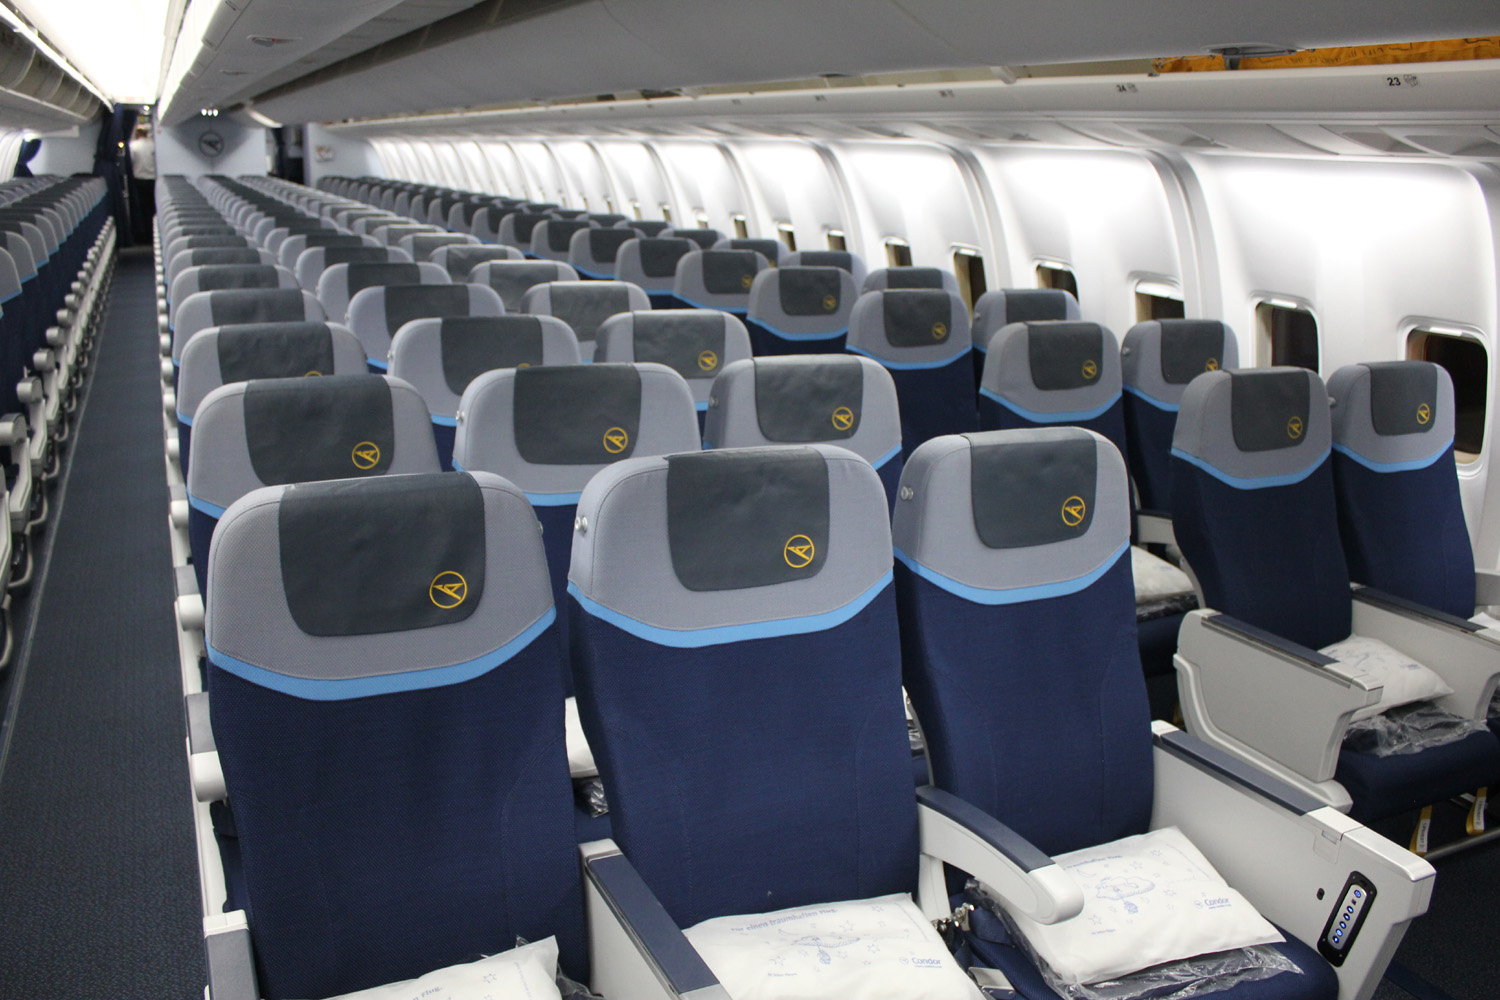 Did you know that Condor Airlines' middle seats on their 767s are abou...